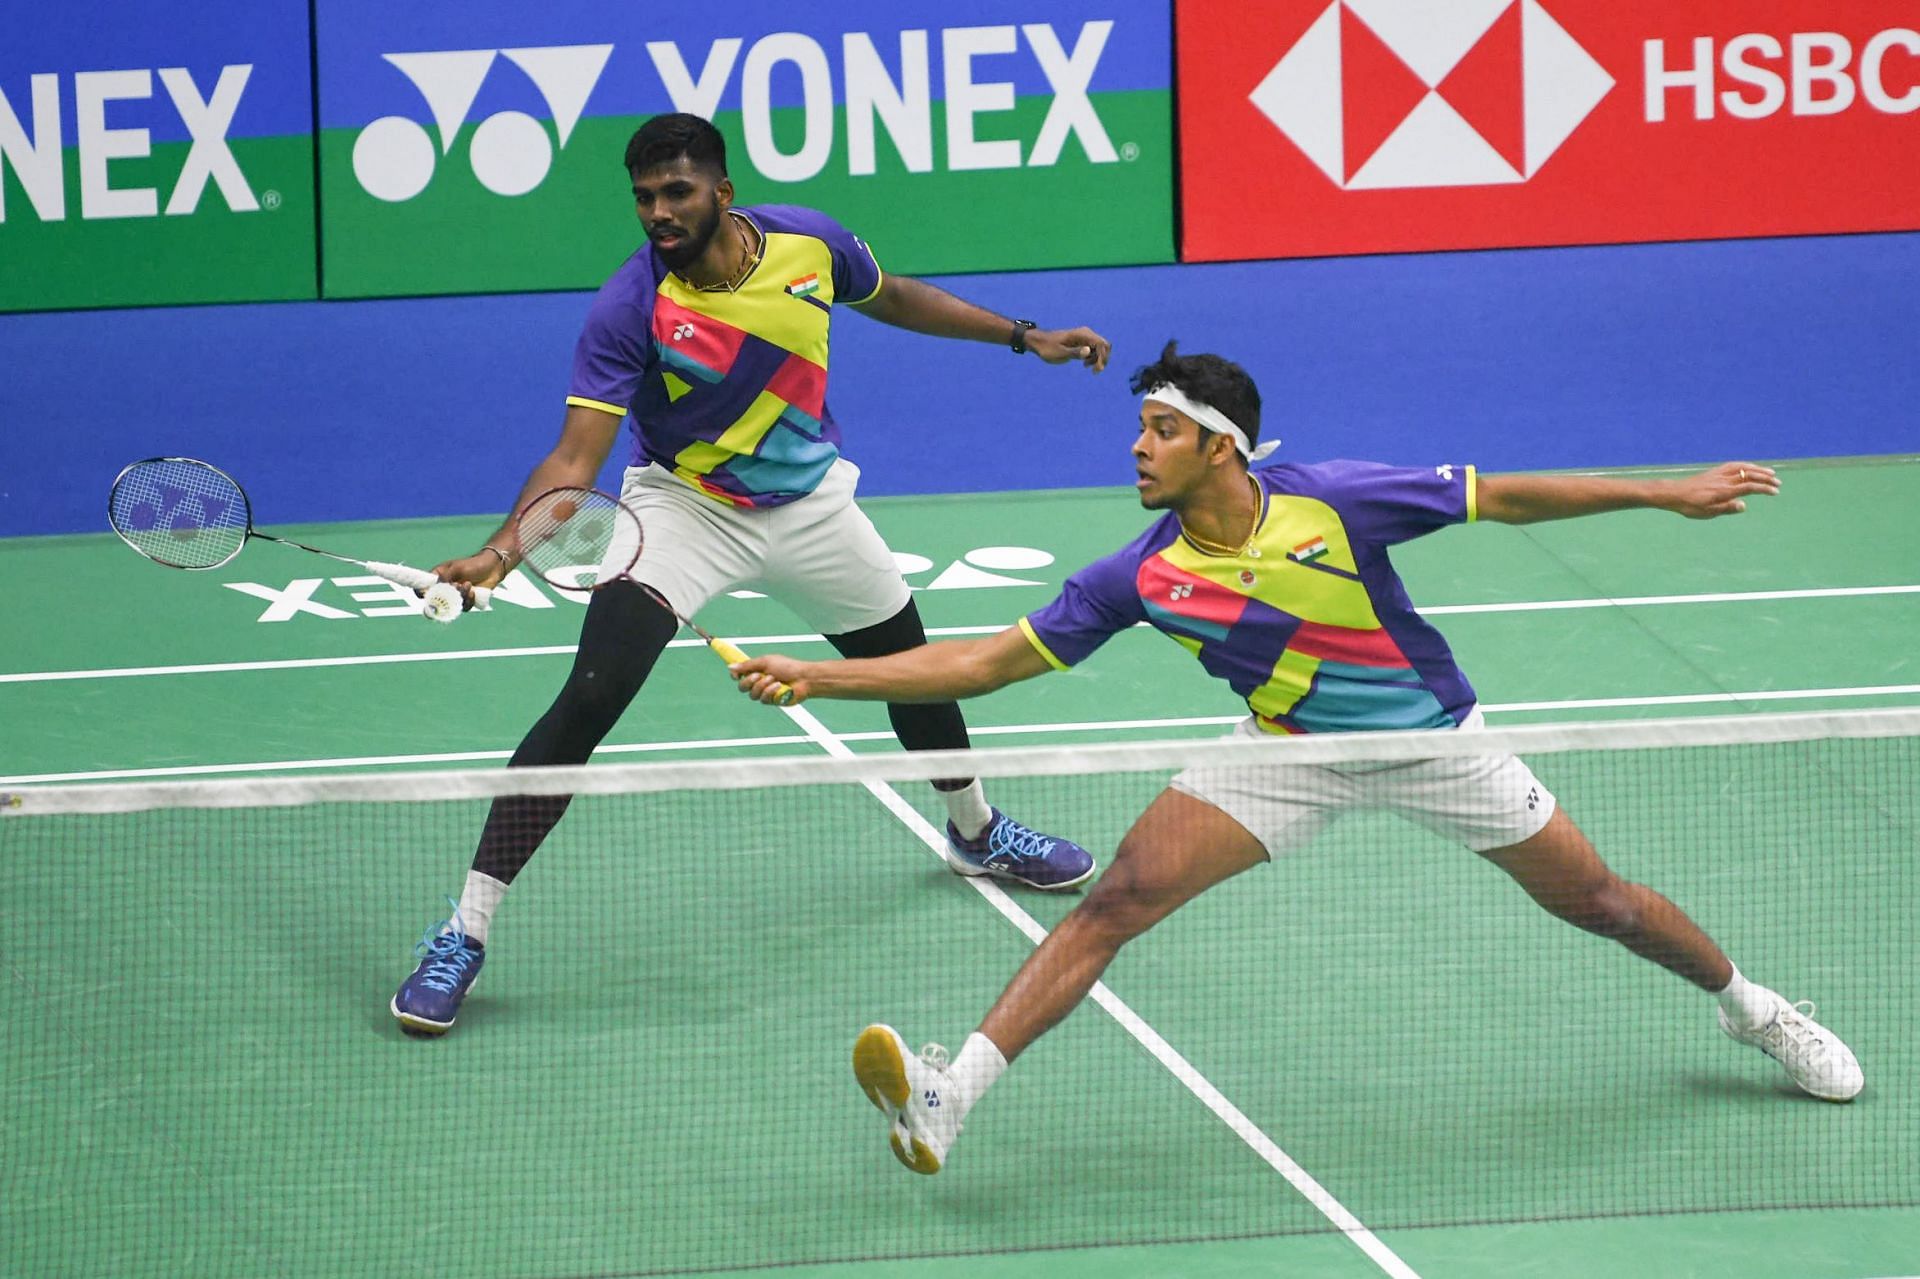 Satwiksairaj Rankireddy (L) and Chirag Shetty have provided the much-needed stability to the Indian badminton team. (Pic credit: BAI)